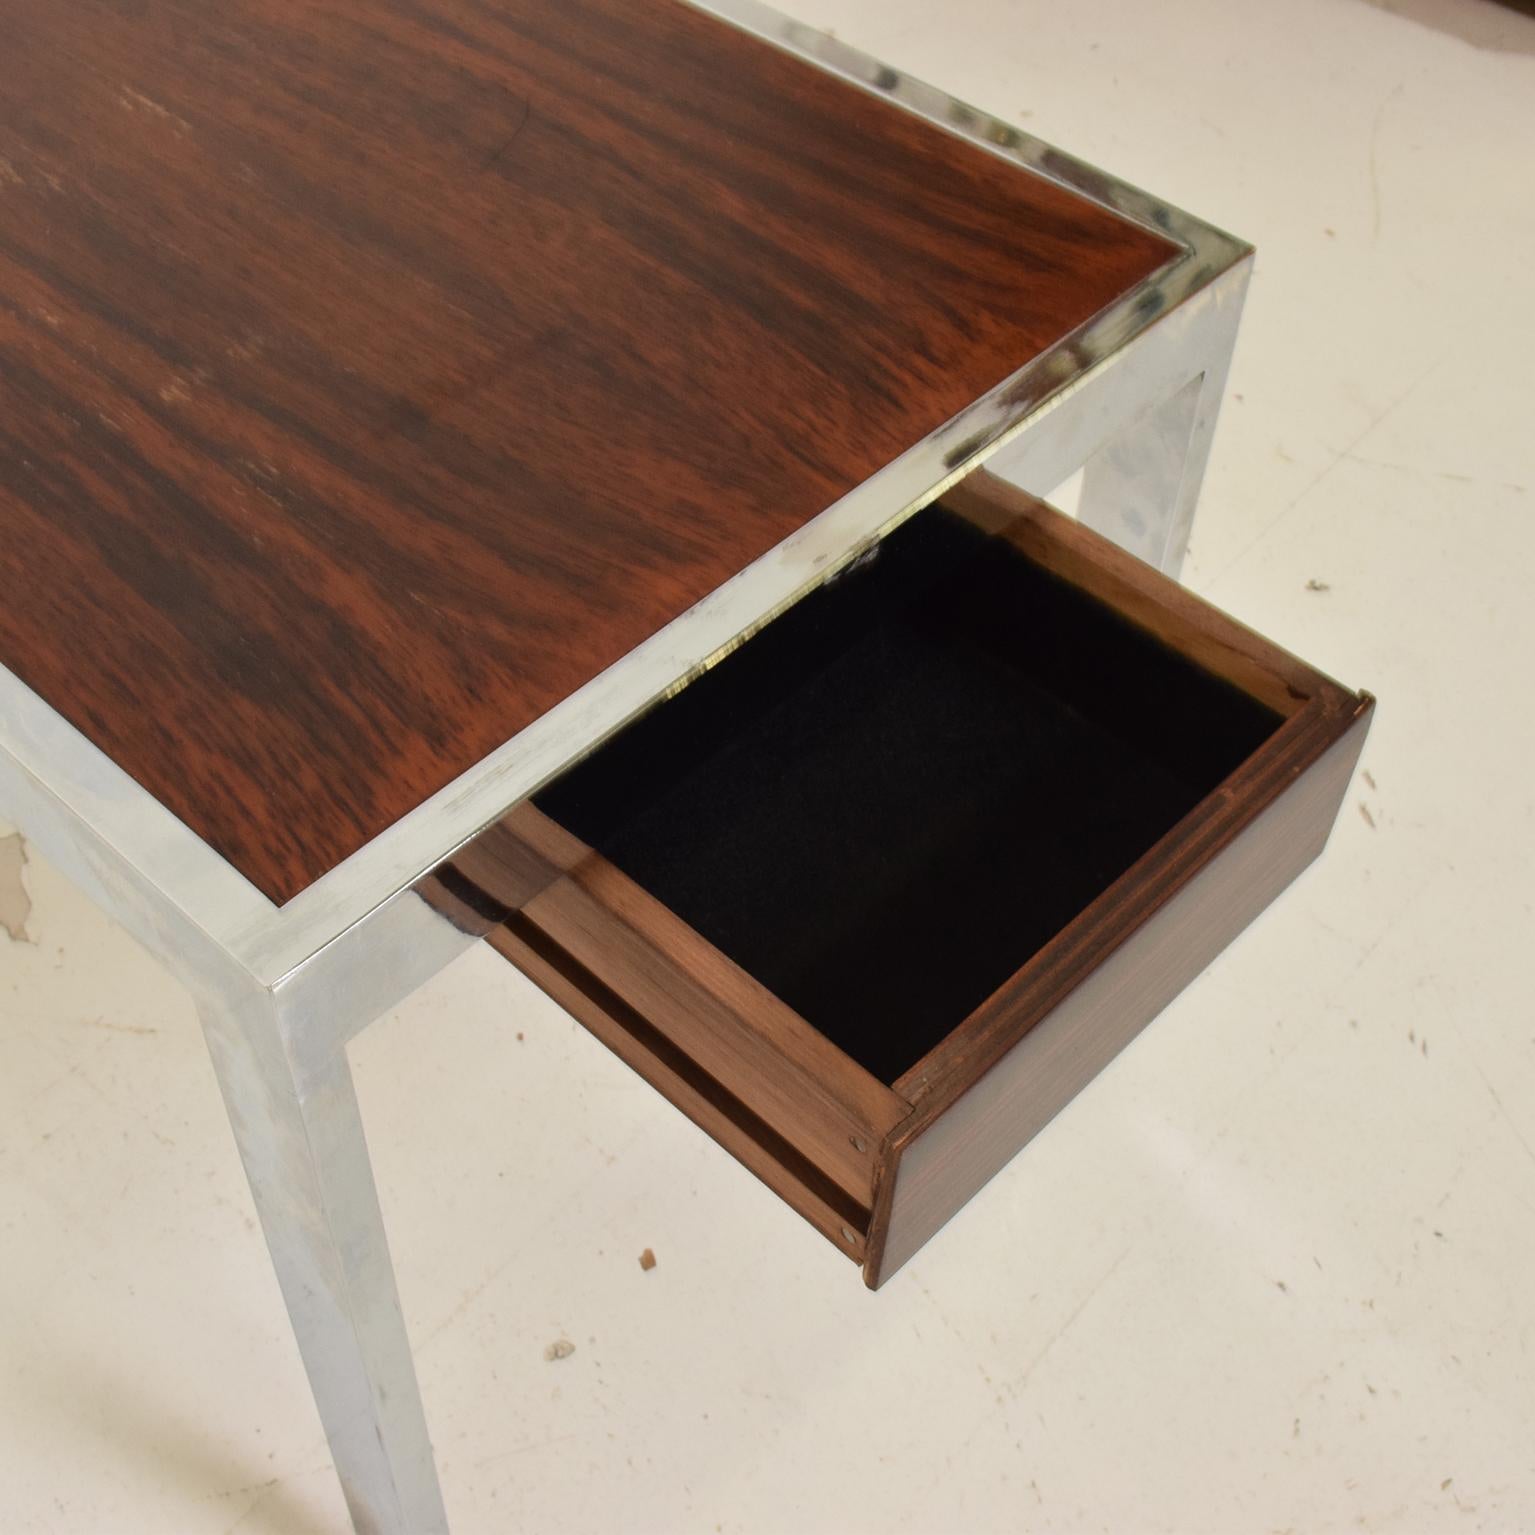 Scandinavian Danish Modern Side Table in Rosewood and Chrome (Mitte des 20. Jahrhunderts)